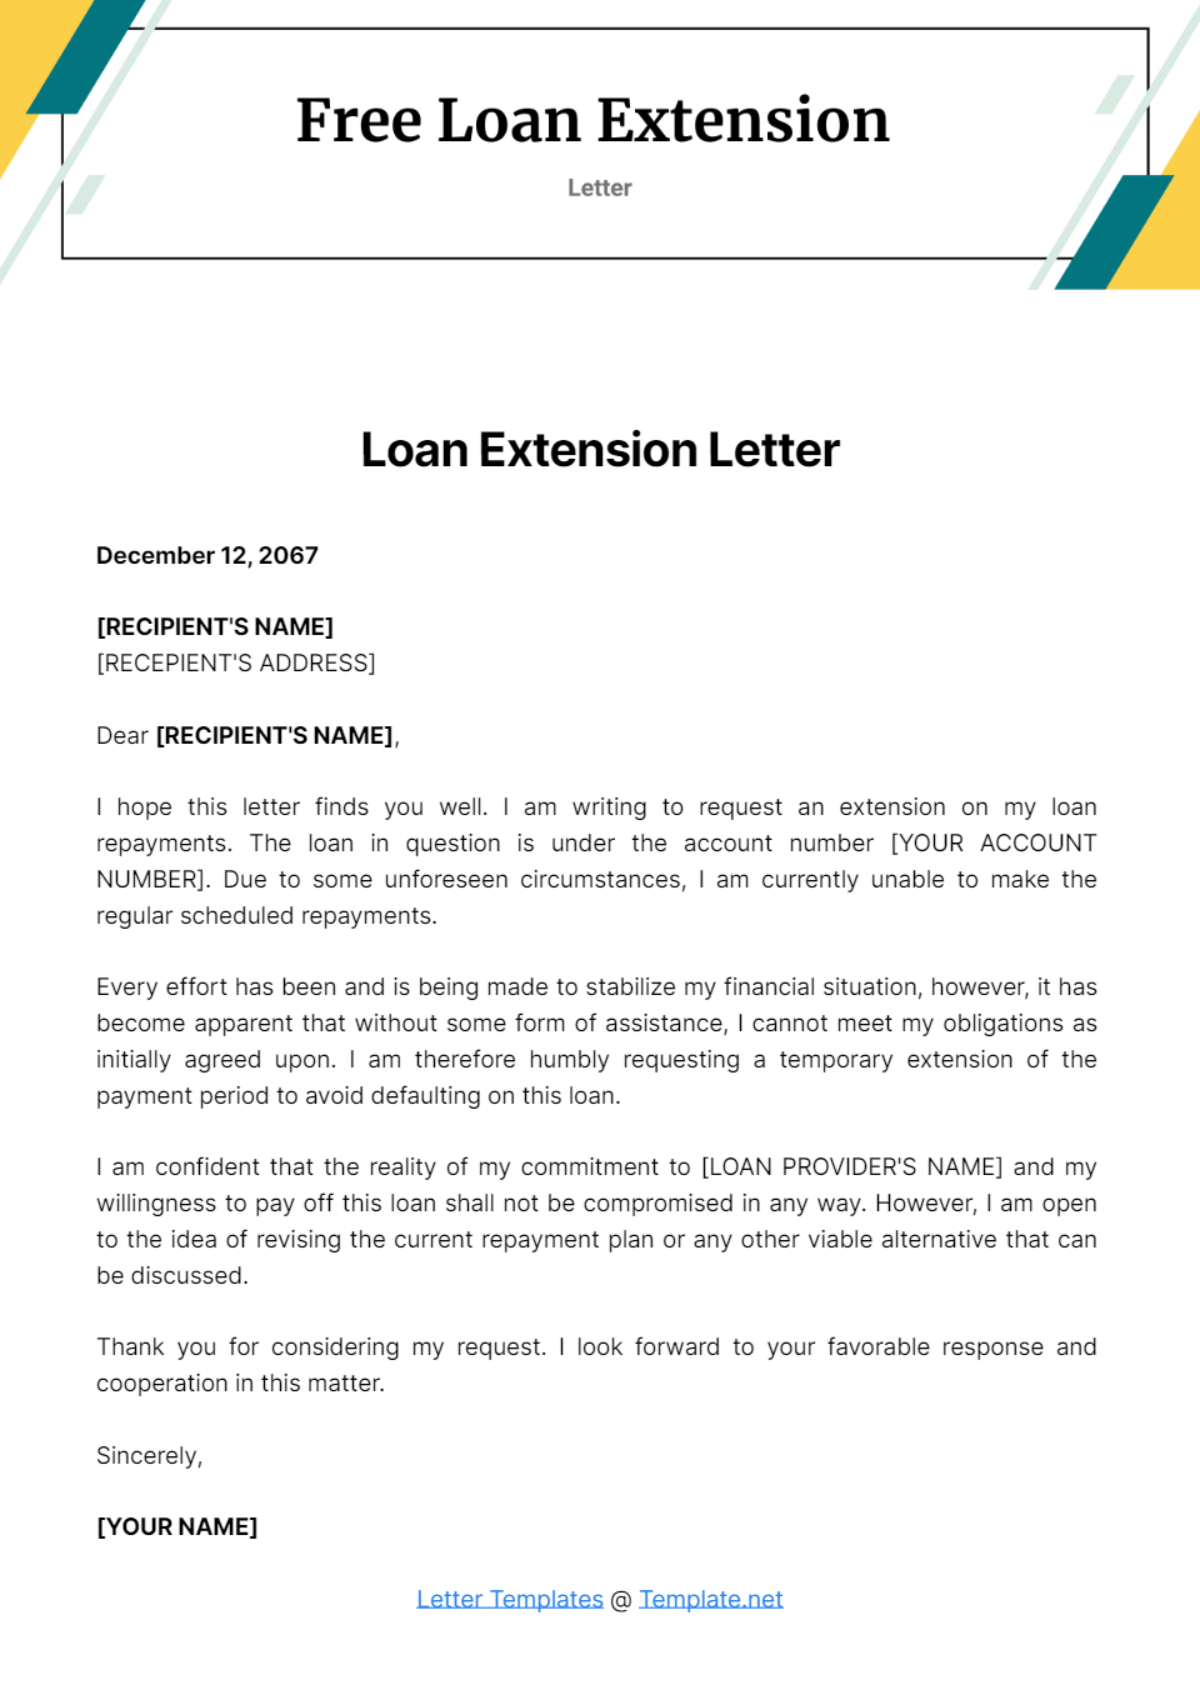 Free Loan Extension Letter Template